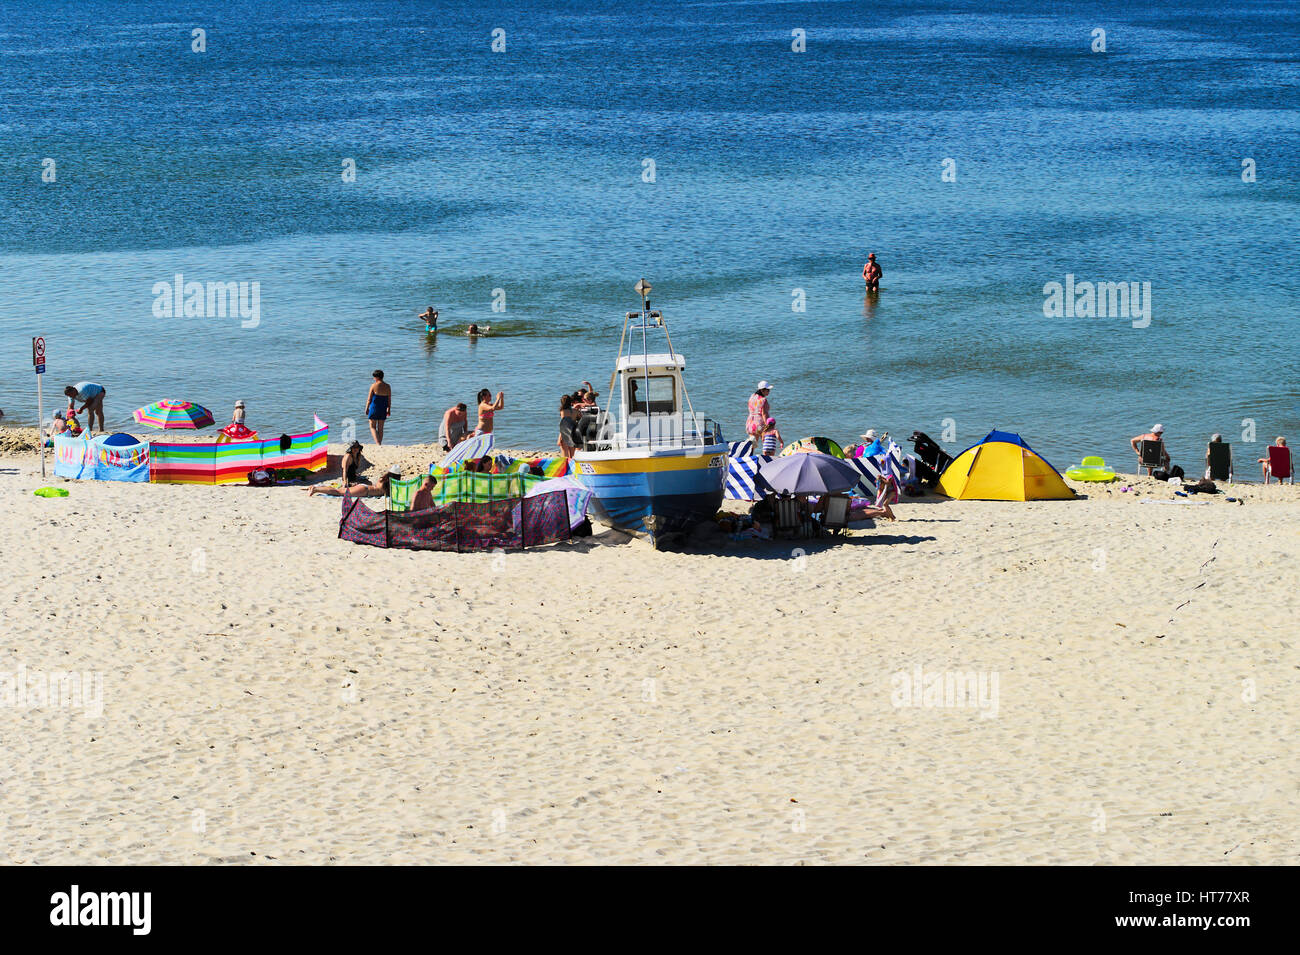 Summer Baltic sea beach with sunbathers on June 24, 2016 in Stegna, Pomerania, Poland. Summer recreation at the seaside. Stock Photo